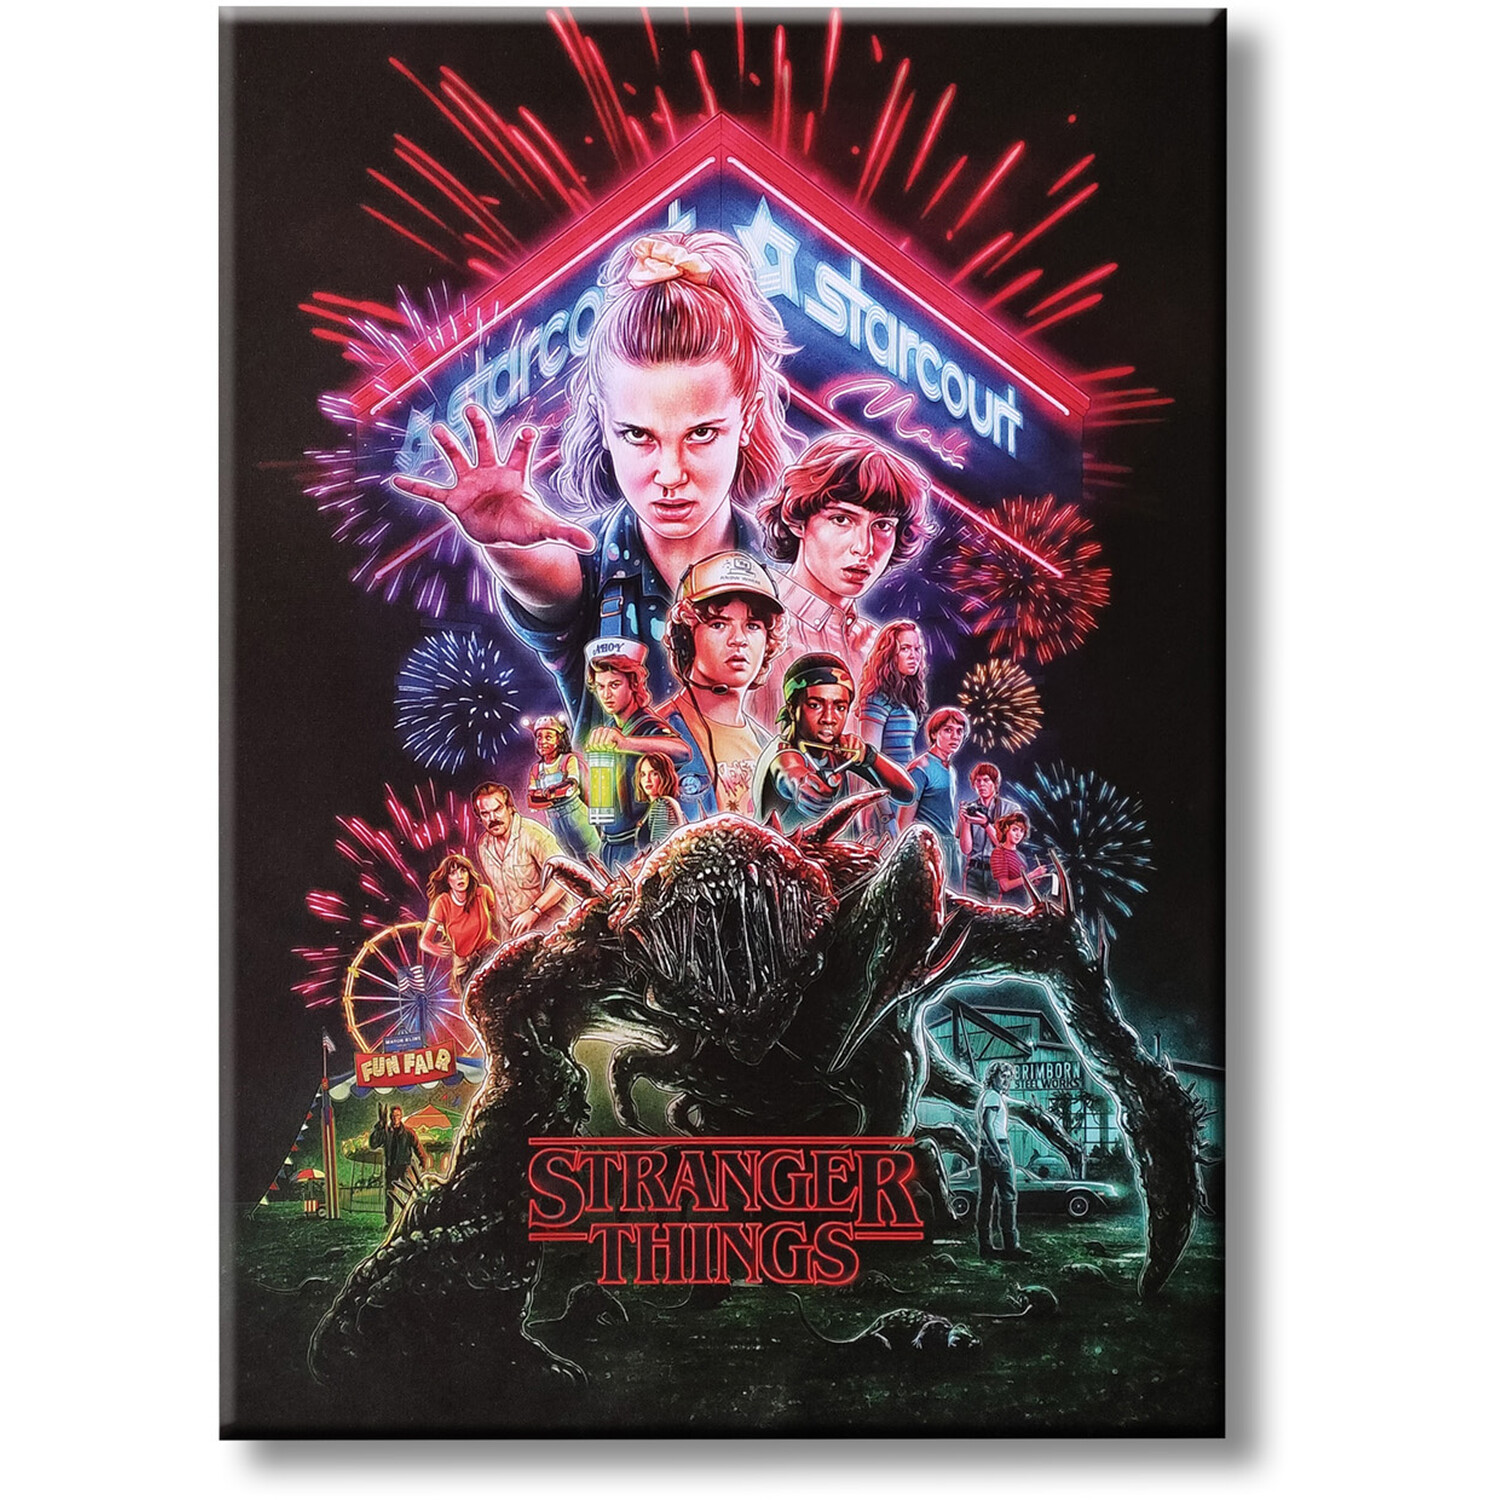 Stranger Things Summer of 85 Canvas 70 x 50cm Image